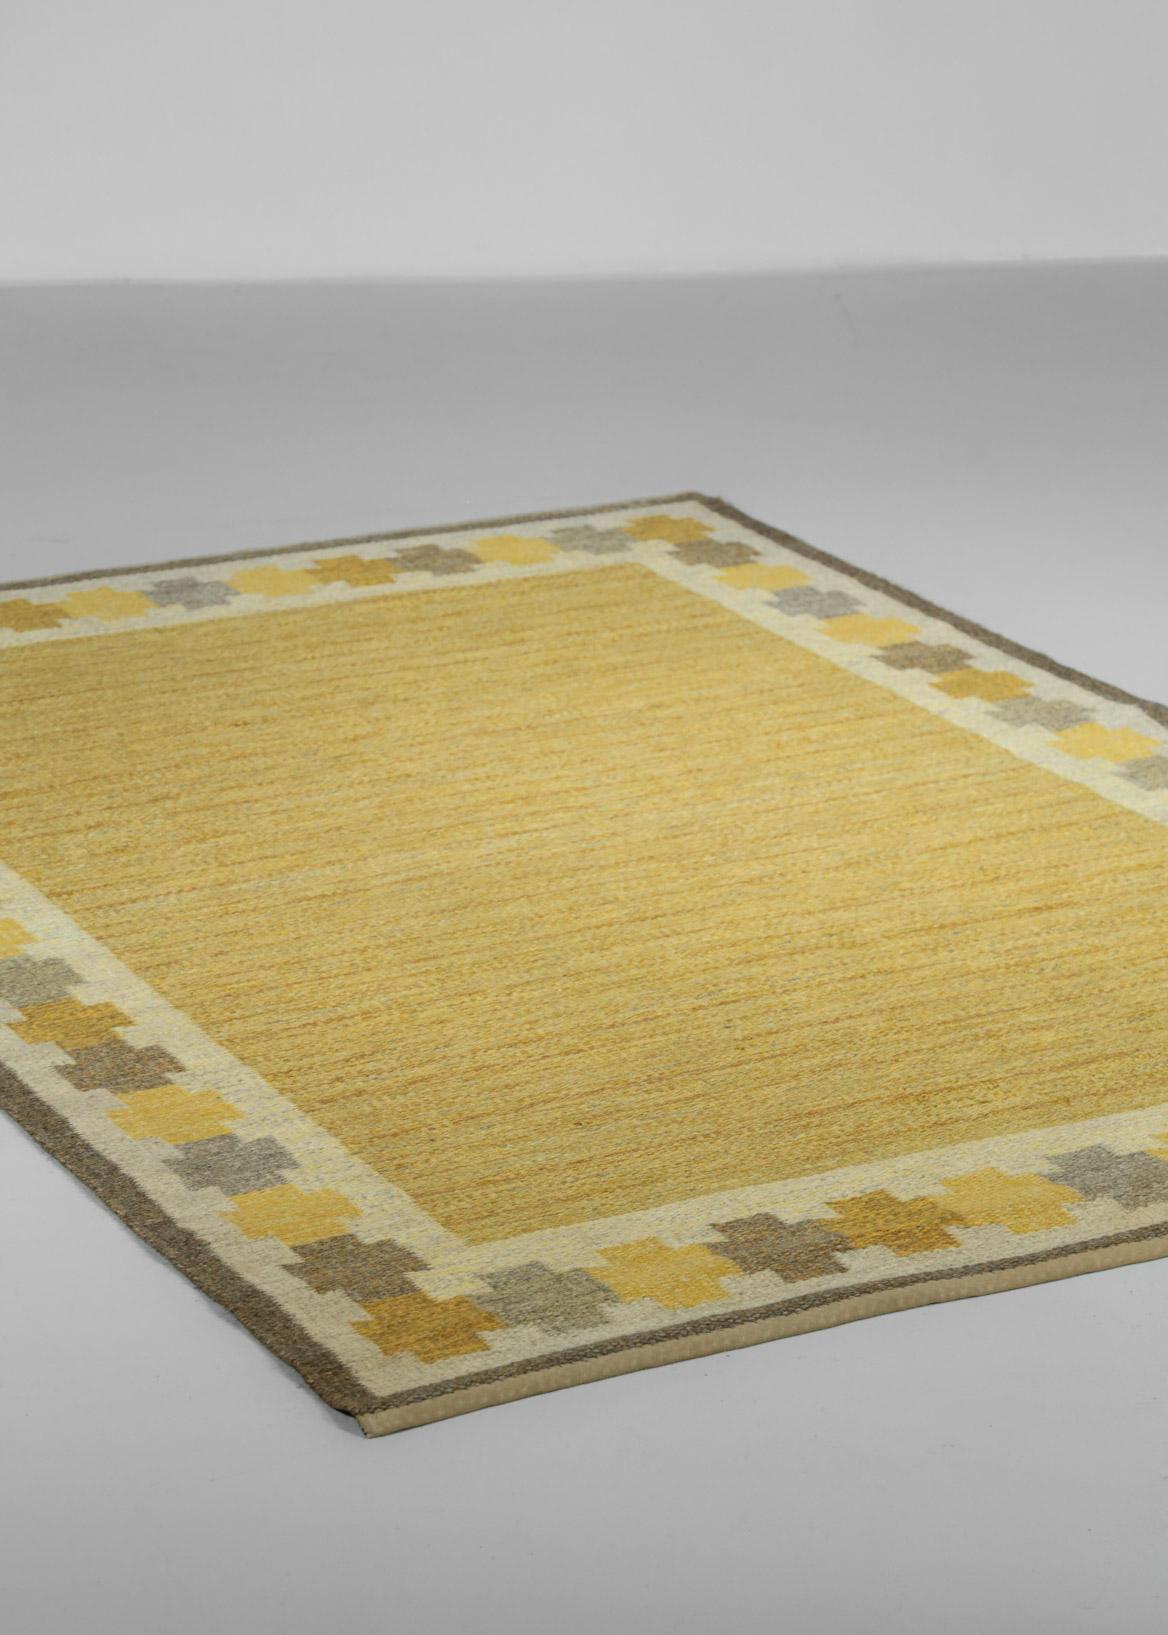 Hand-Woven Scandinavian Hand Woven Rug from Ingegerd Silow from the 60's For Sale